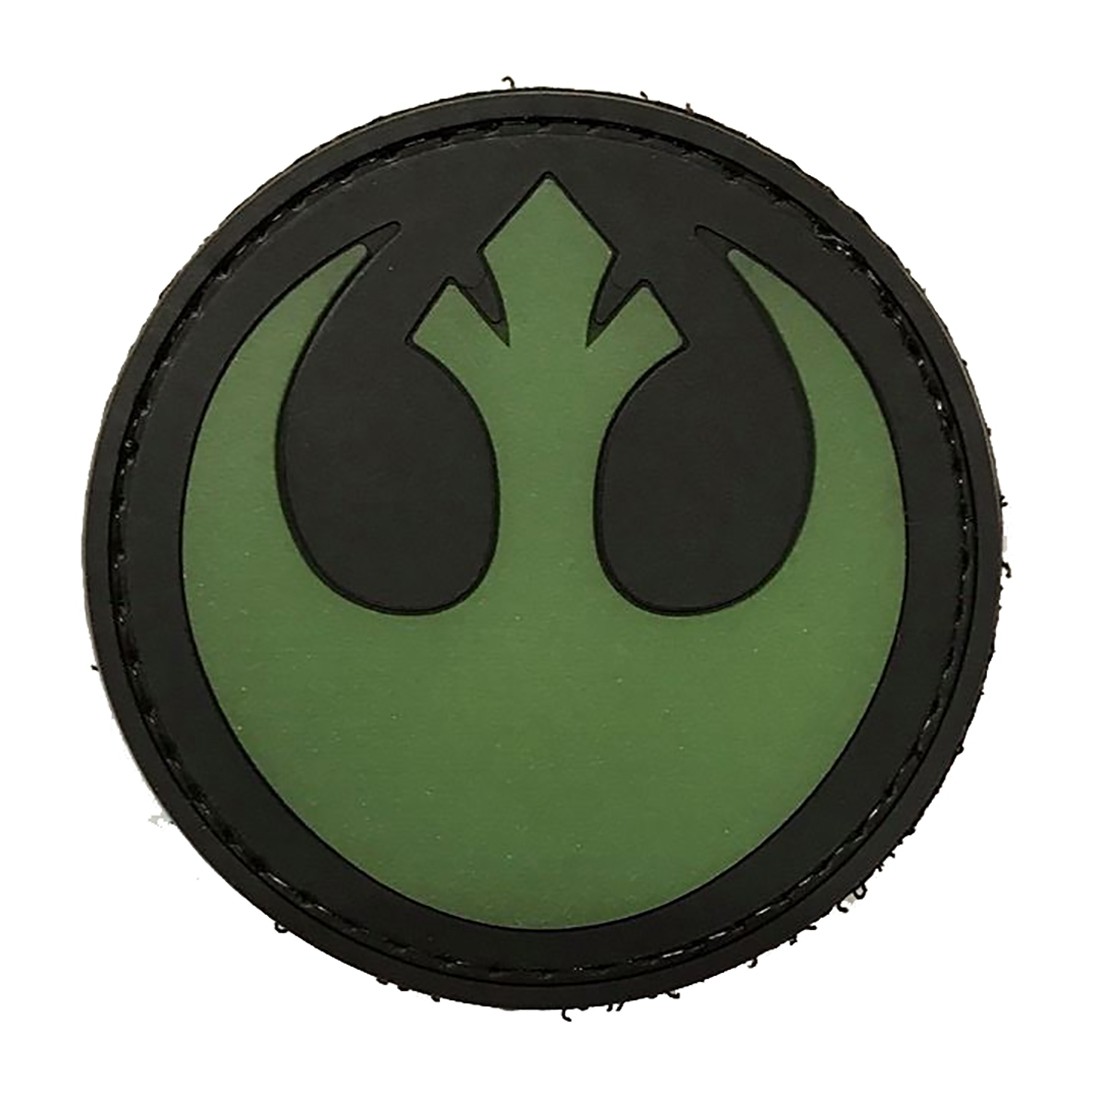 STAR WARS REBEL (Black & Green) Tactical Rubber Velcro Patches